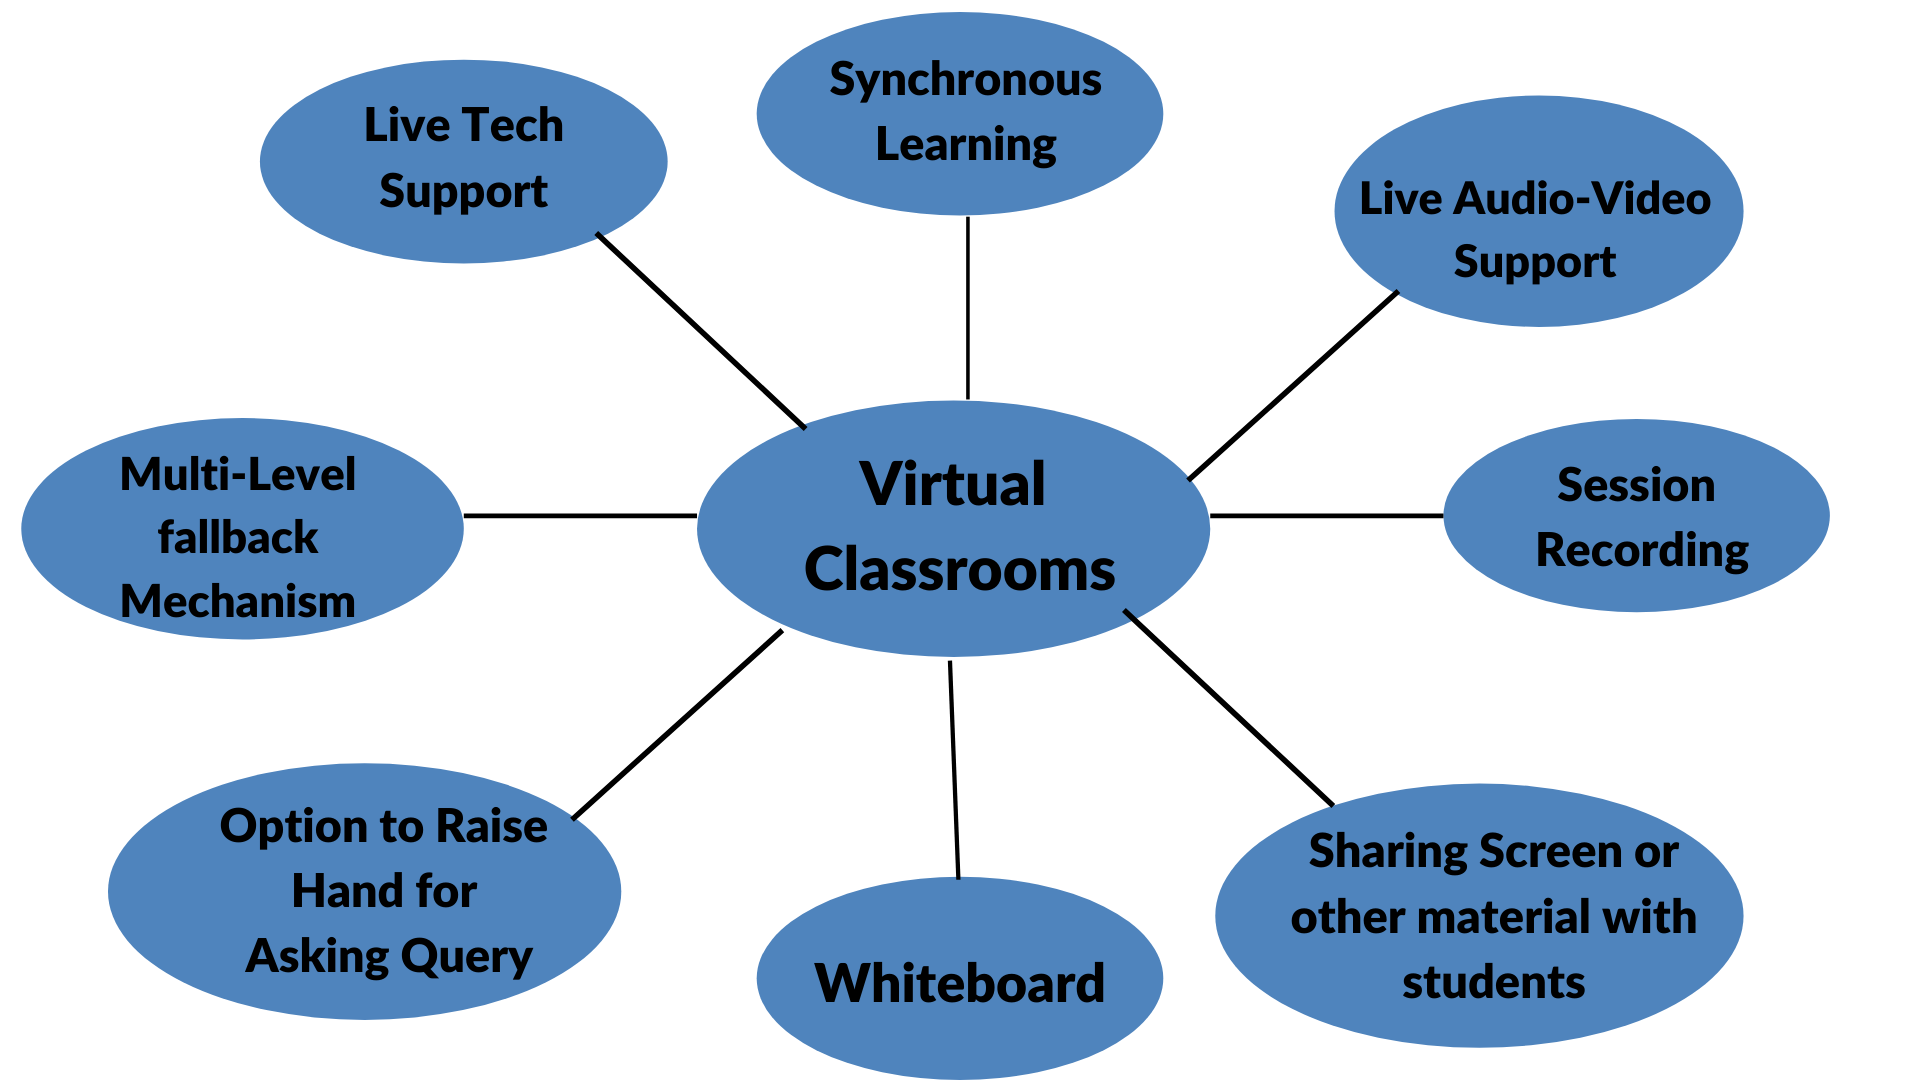 The components of virtual classrooms